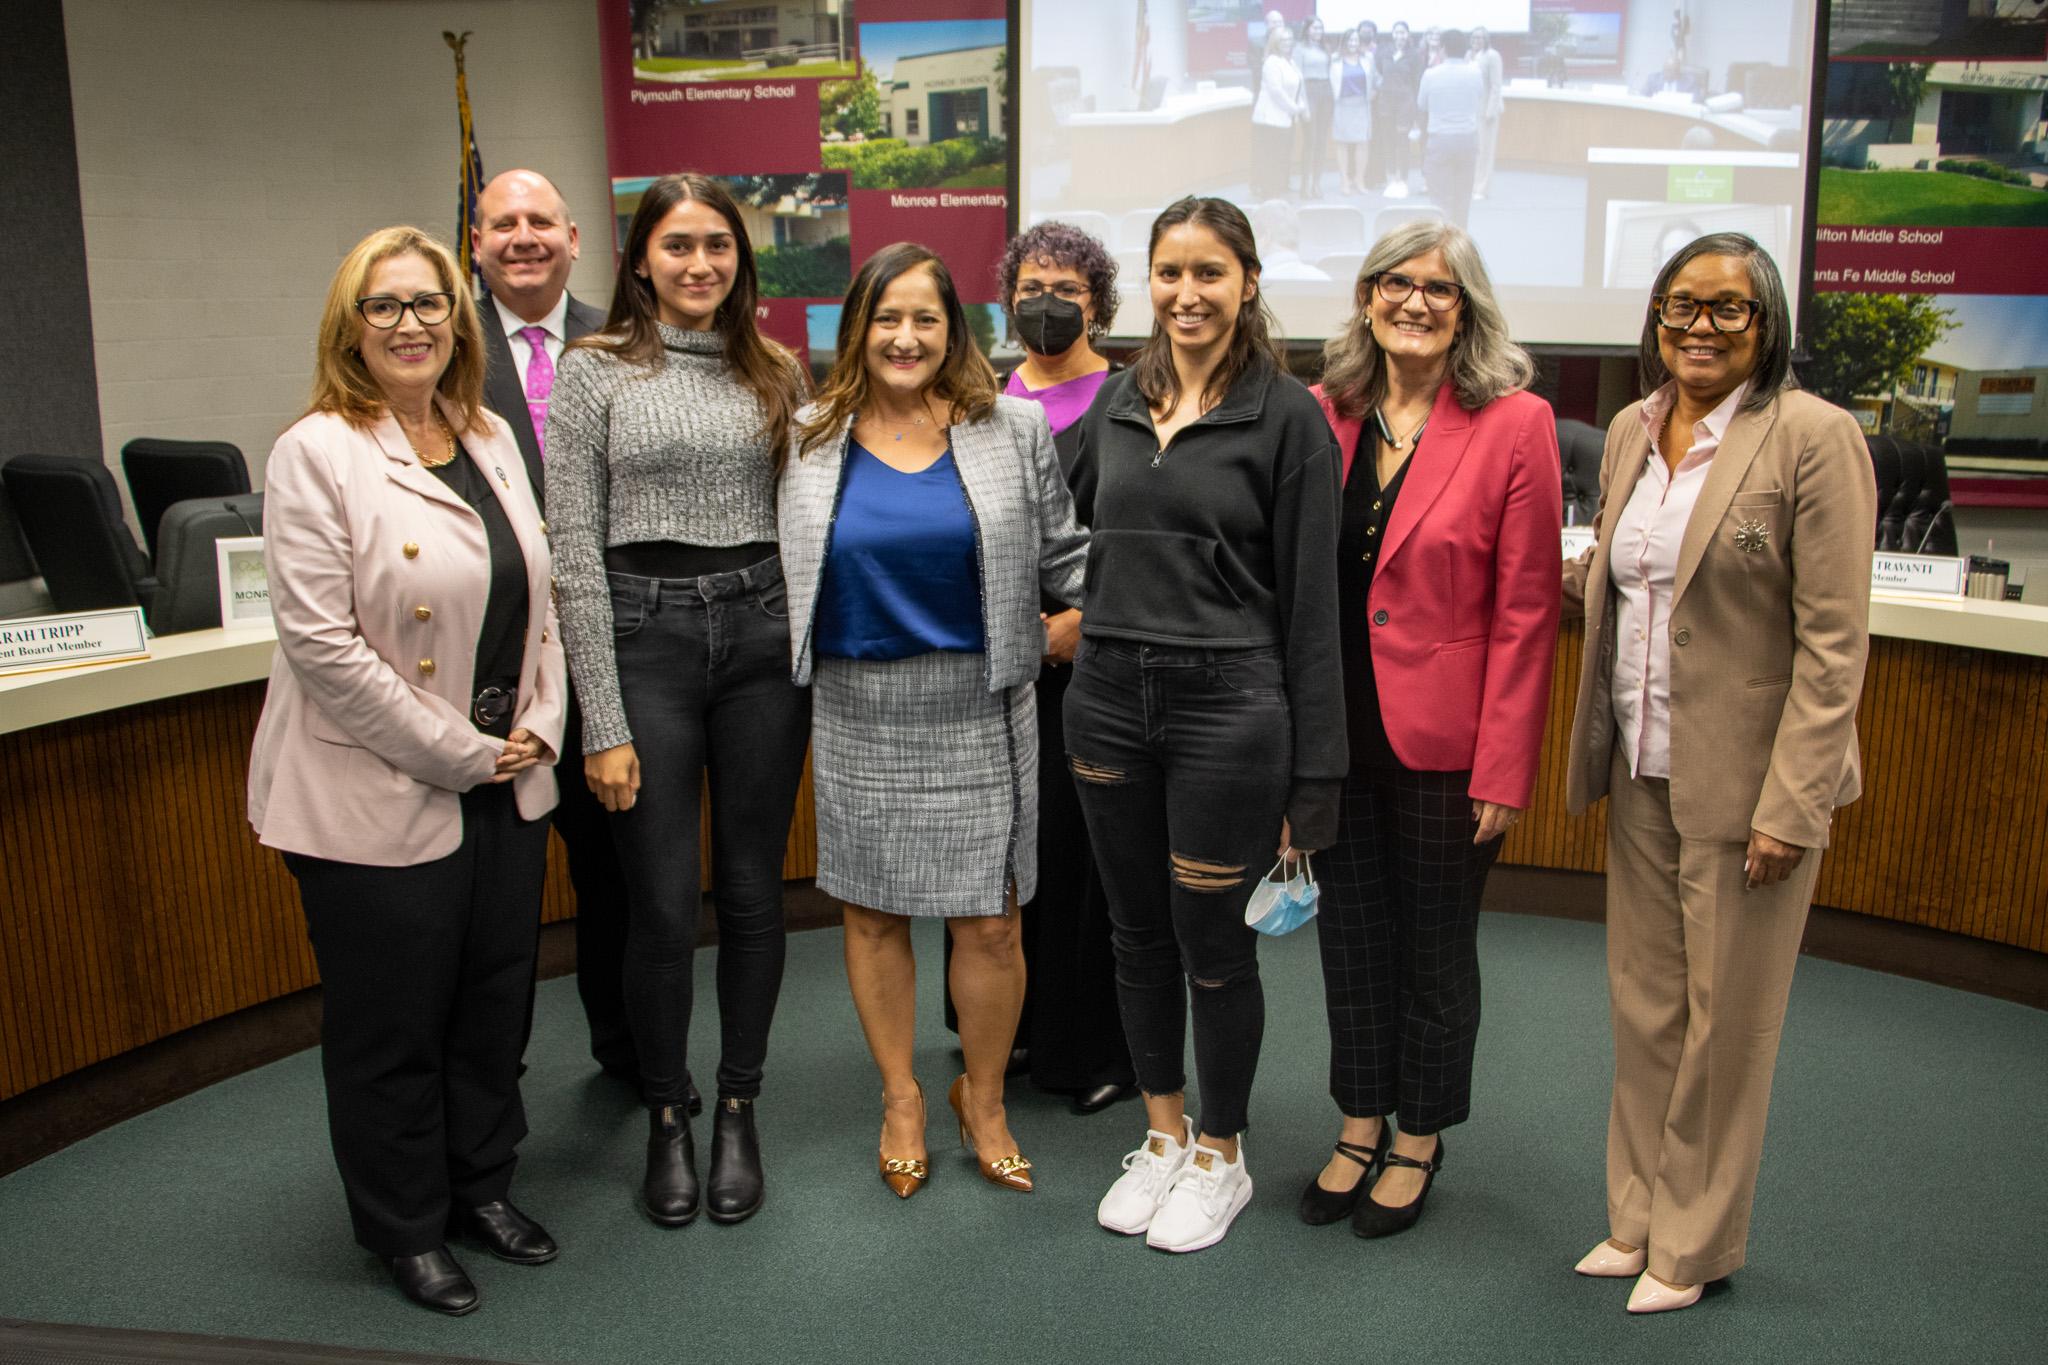 Board Members also welcomed Alma Ulloa as the new Executive Director of Special Education.